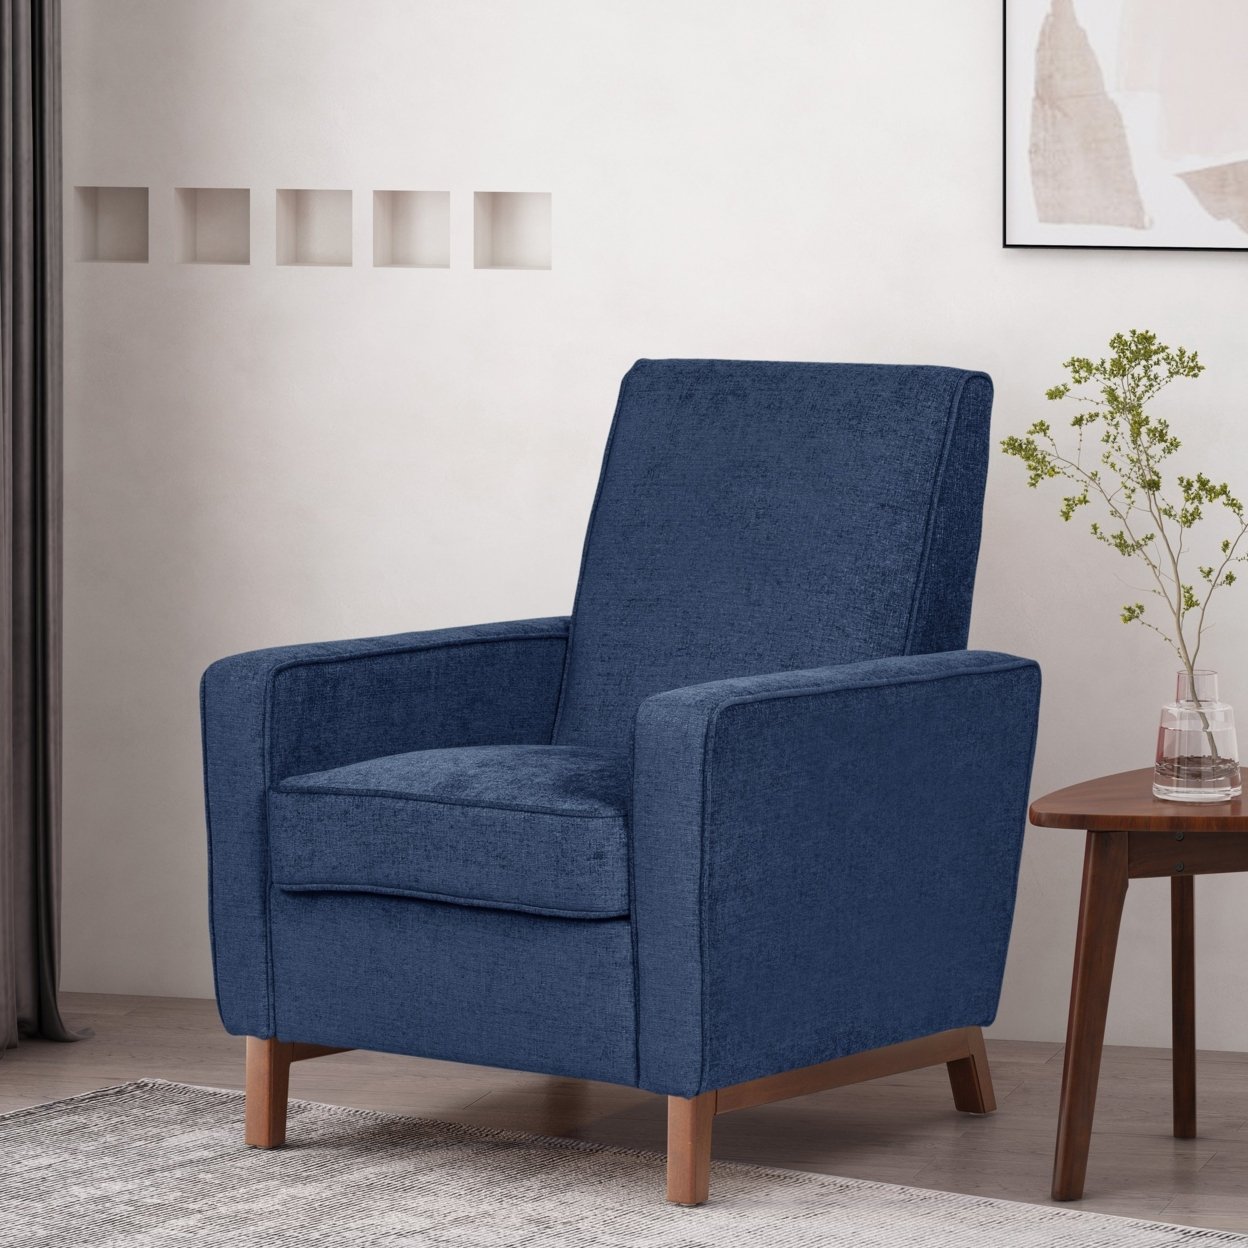 Haston Contemporary Upholstered Club Chair - Navy Blue